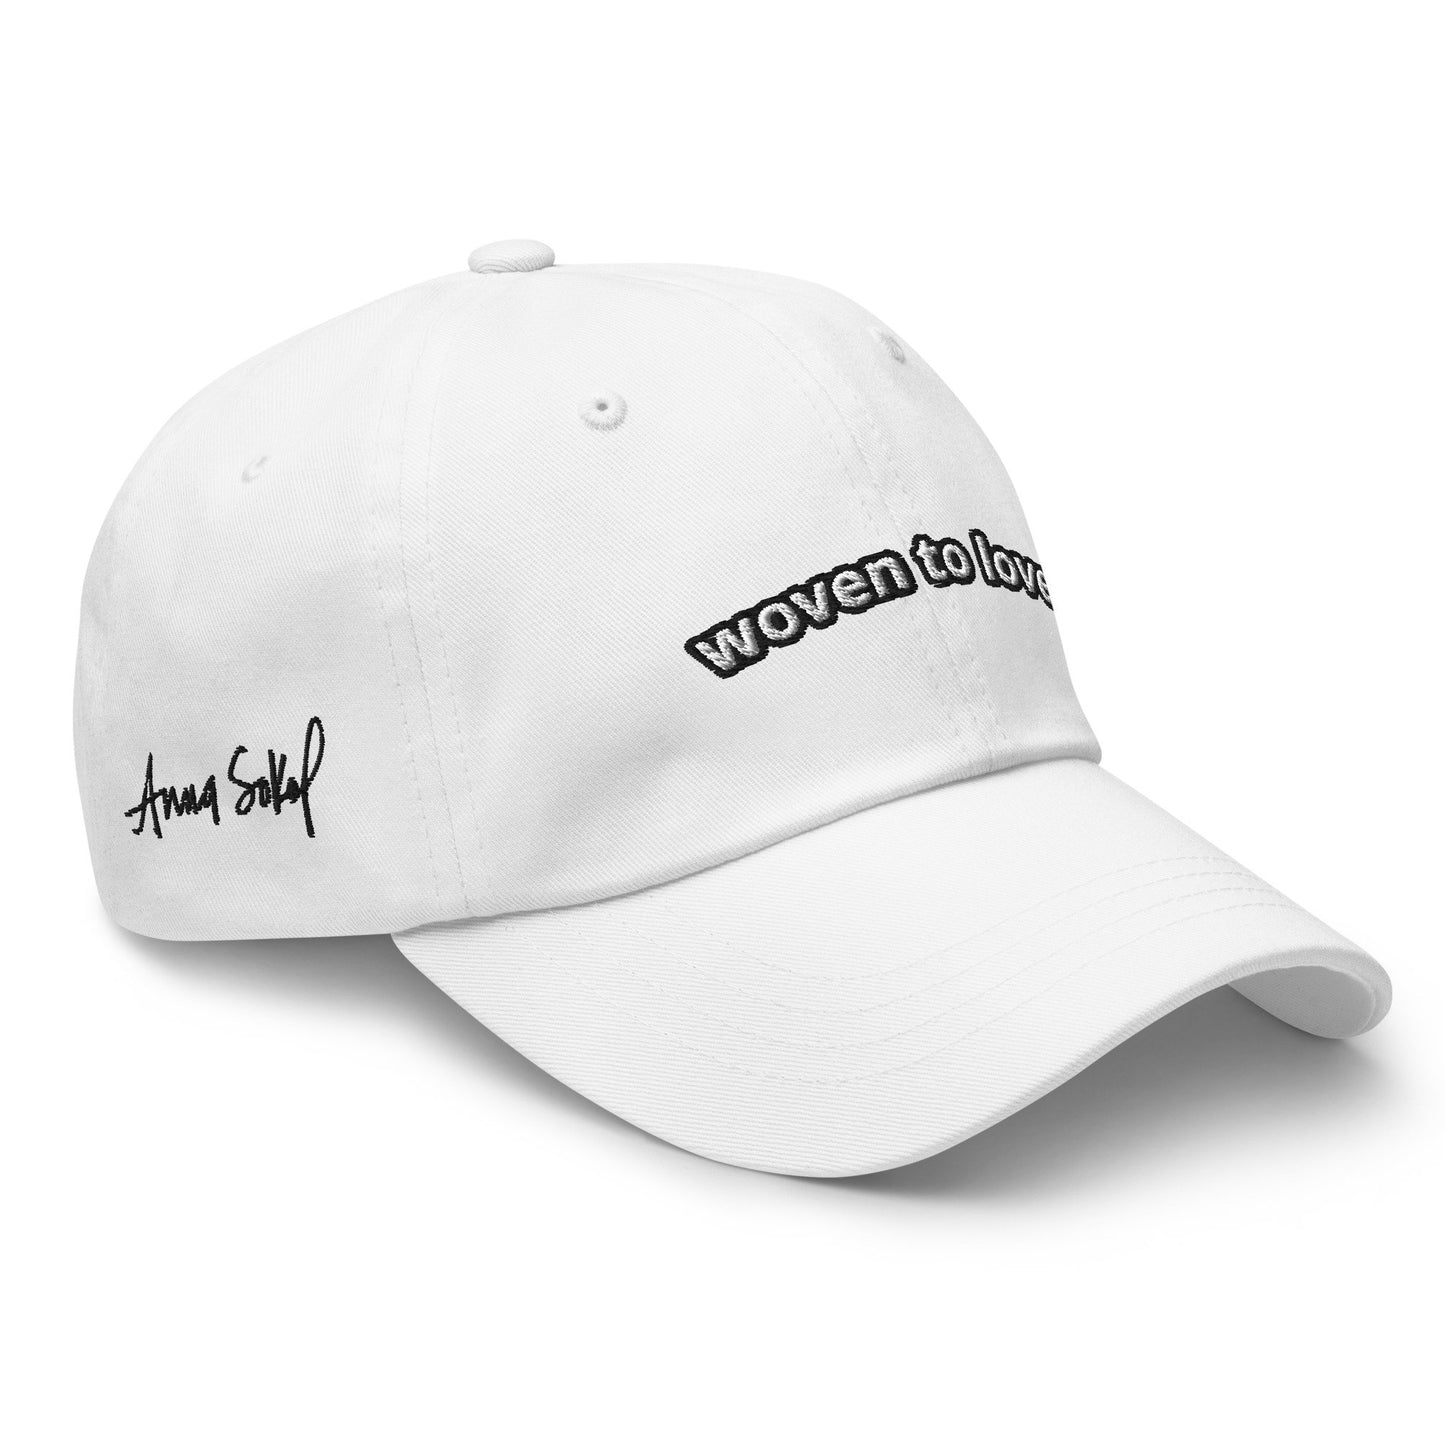 Woven to Love - Dad hat